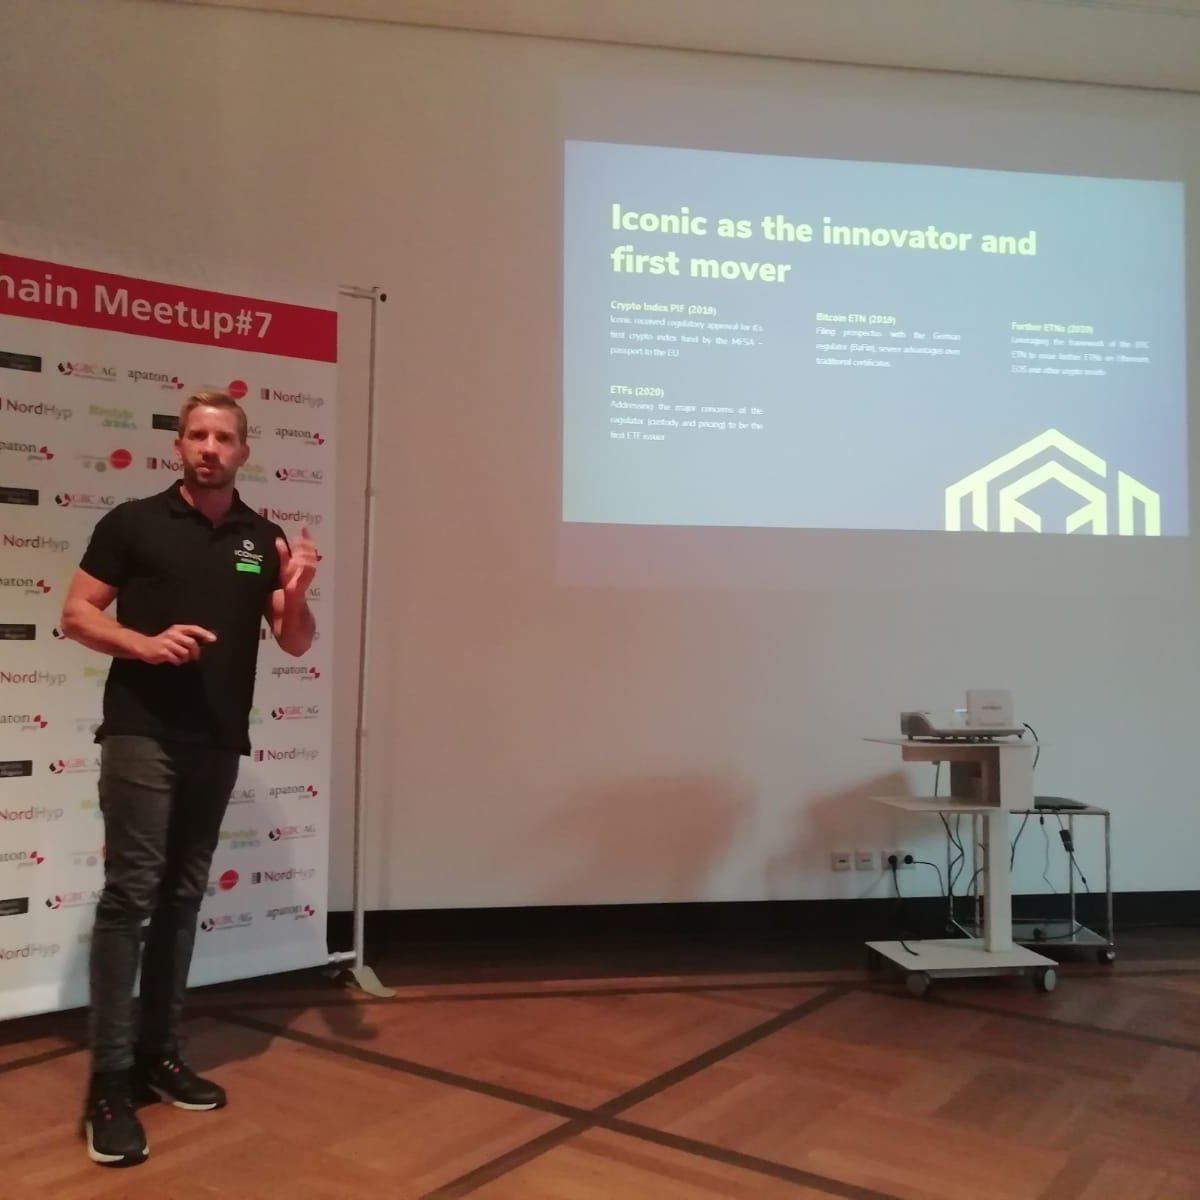 @Iconiq_Max presenting the latest developments in the #crypto markets and #iconicholding's plans around it at #Hannover #Blockchain #Meetup. We also had @BRAINCITIES @pg_vreo @Vaultoro and @ActiwareD at the event. @GoingPublic_de @hannoverimpuls @lifestyledrinks @GBC_Research